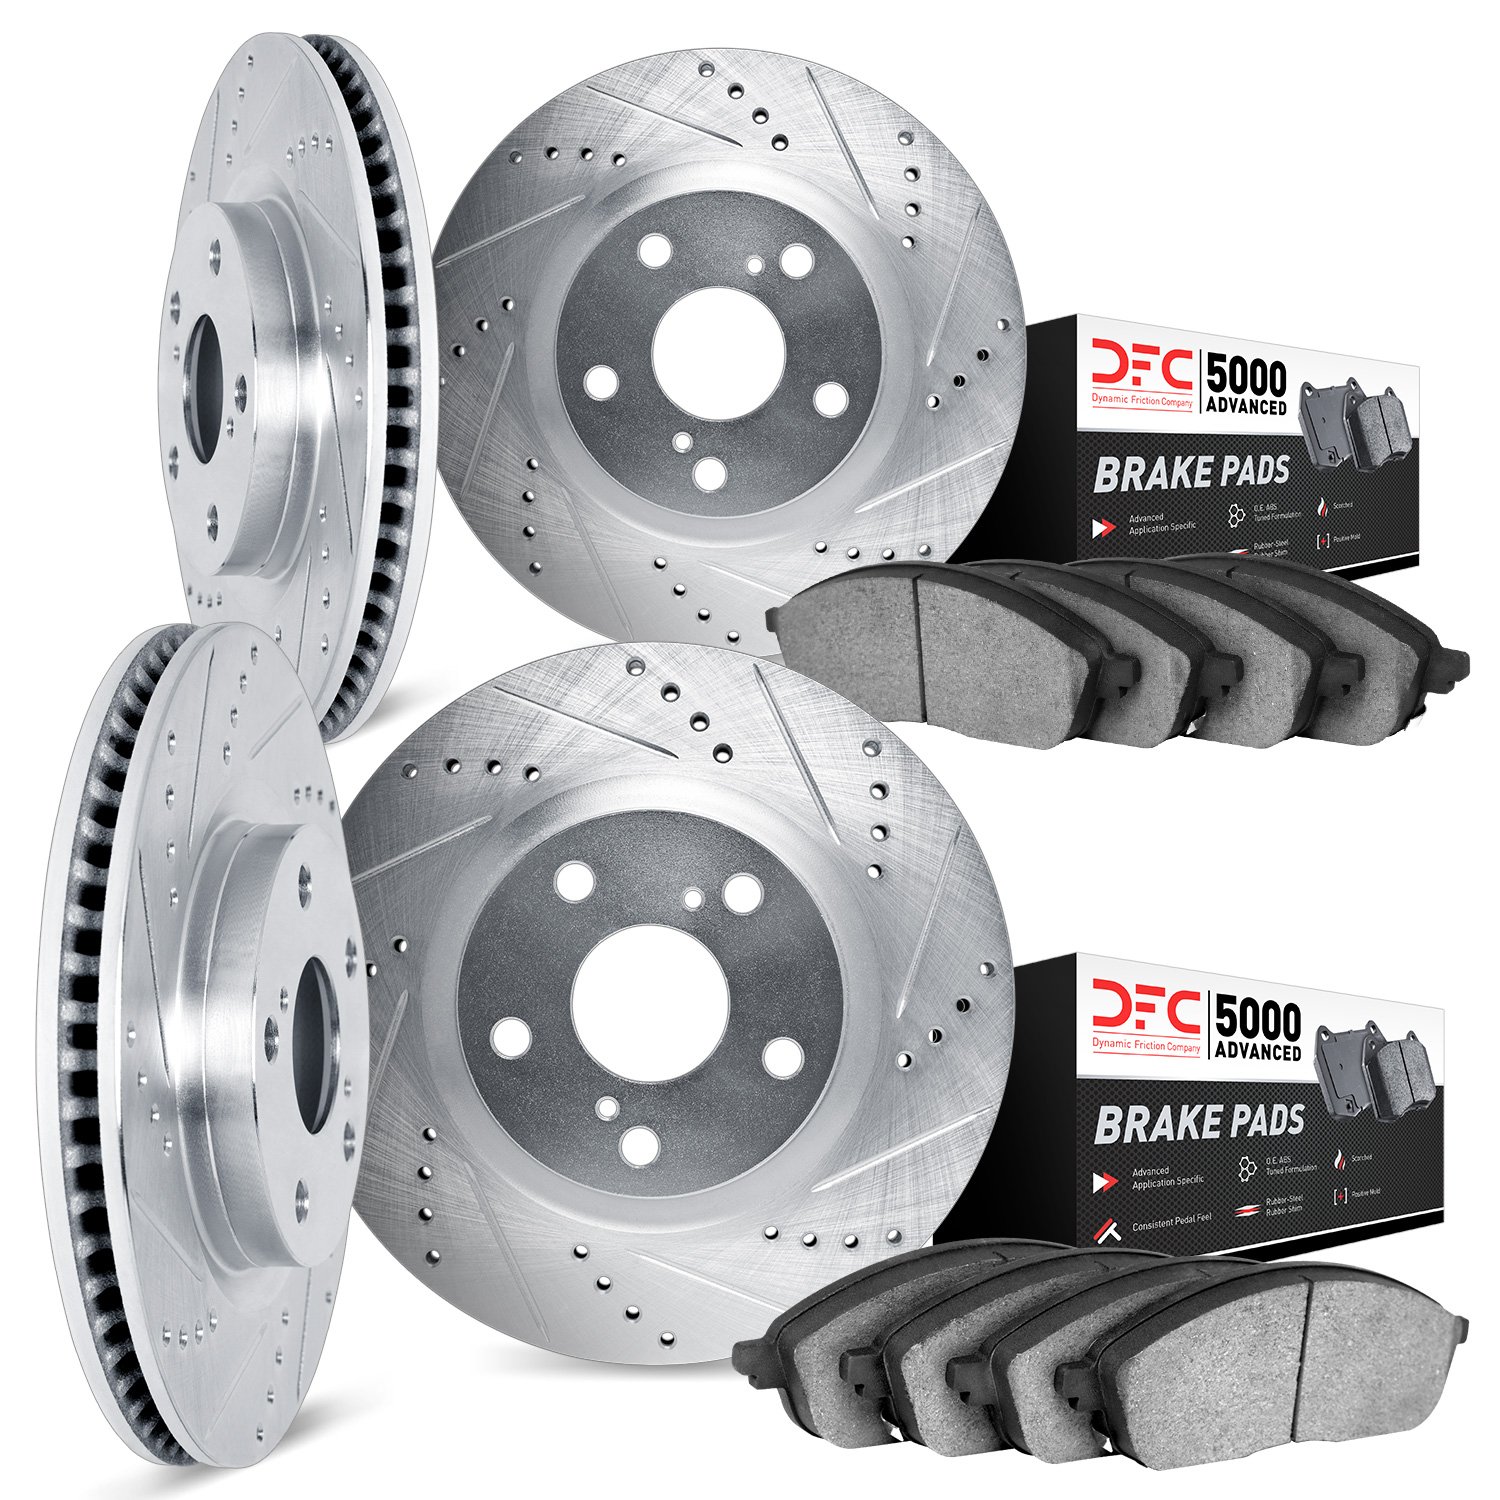 7504-13018 Drilled/Slotted Brake Rotors w/5000 Advanced Brake Pads Kit [Silver], Fits Select Subaru, Position: Front and Rear